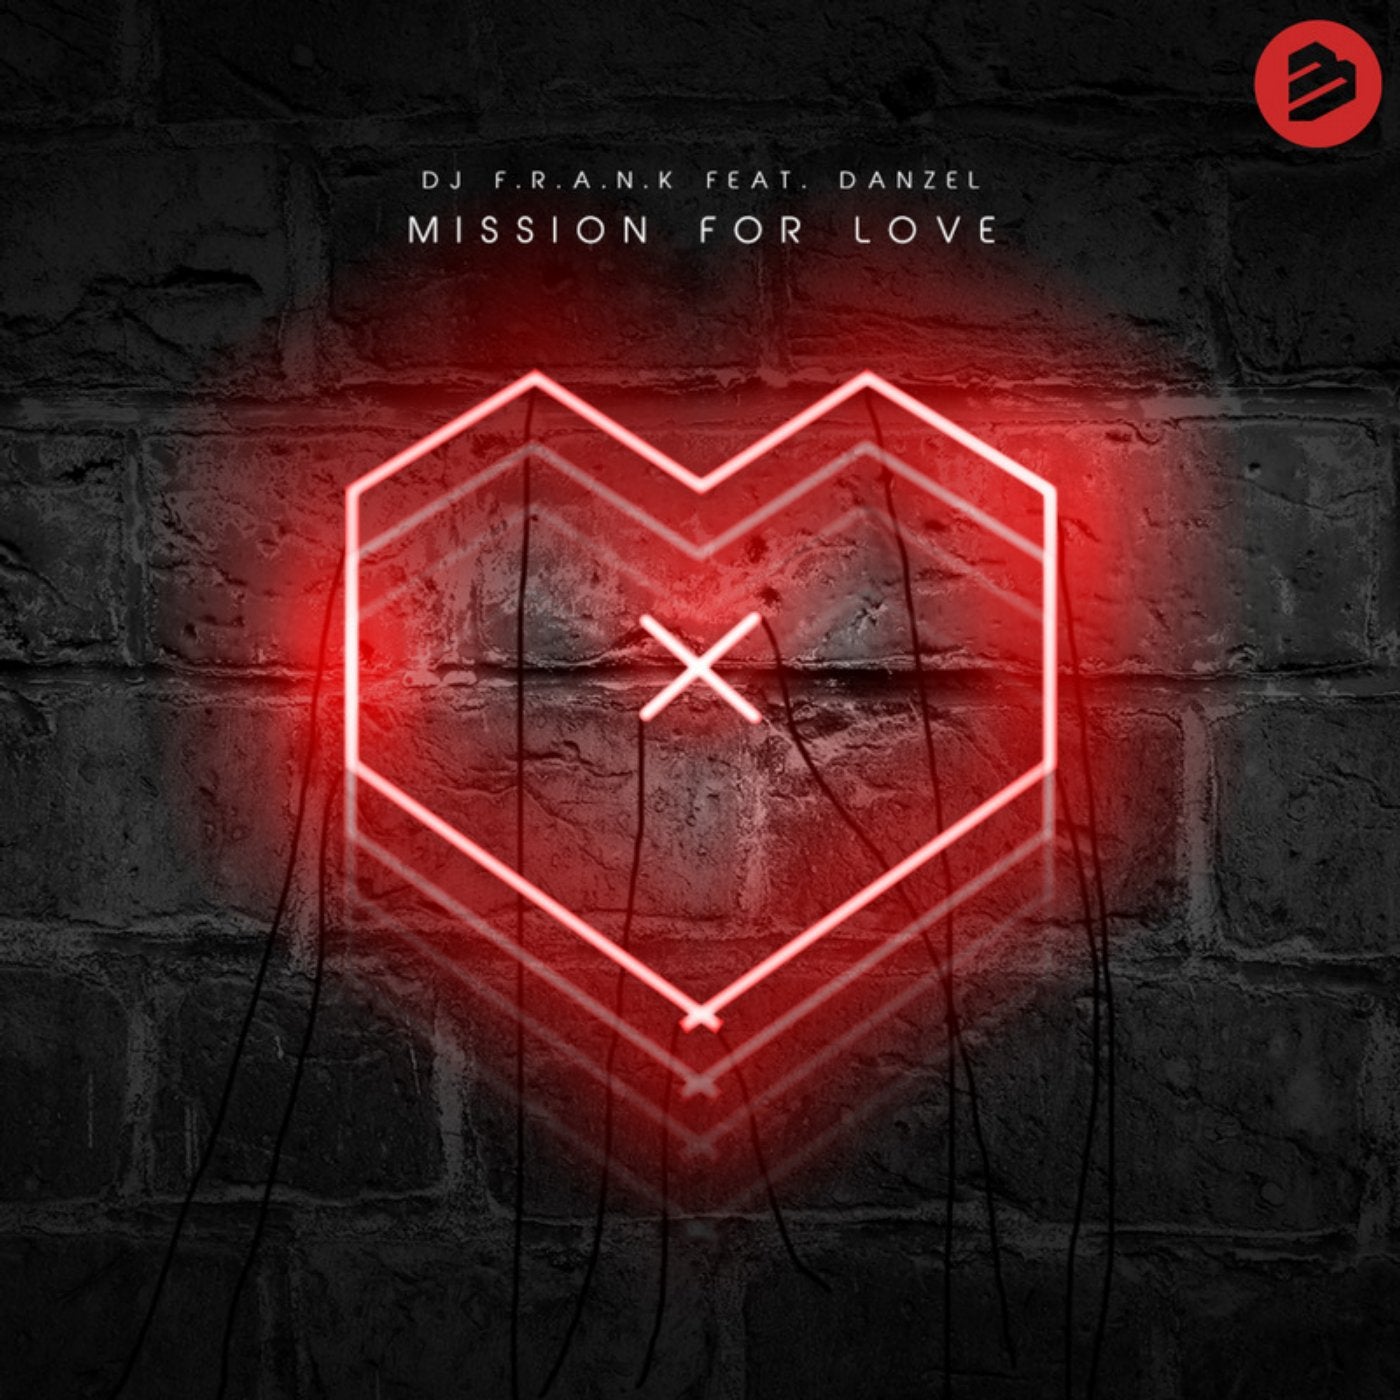 Mission for Love